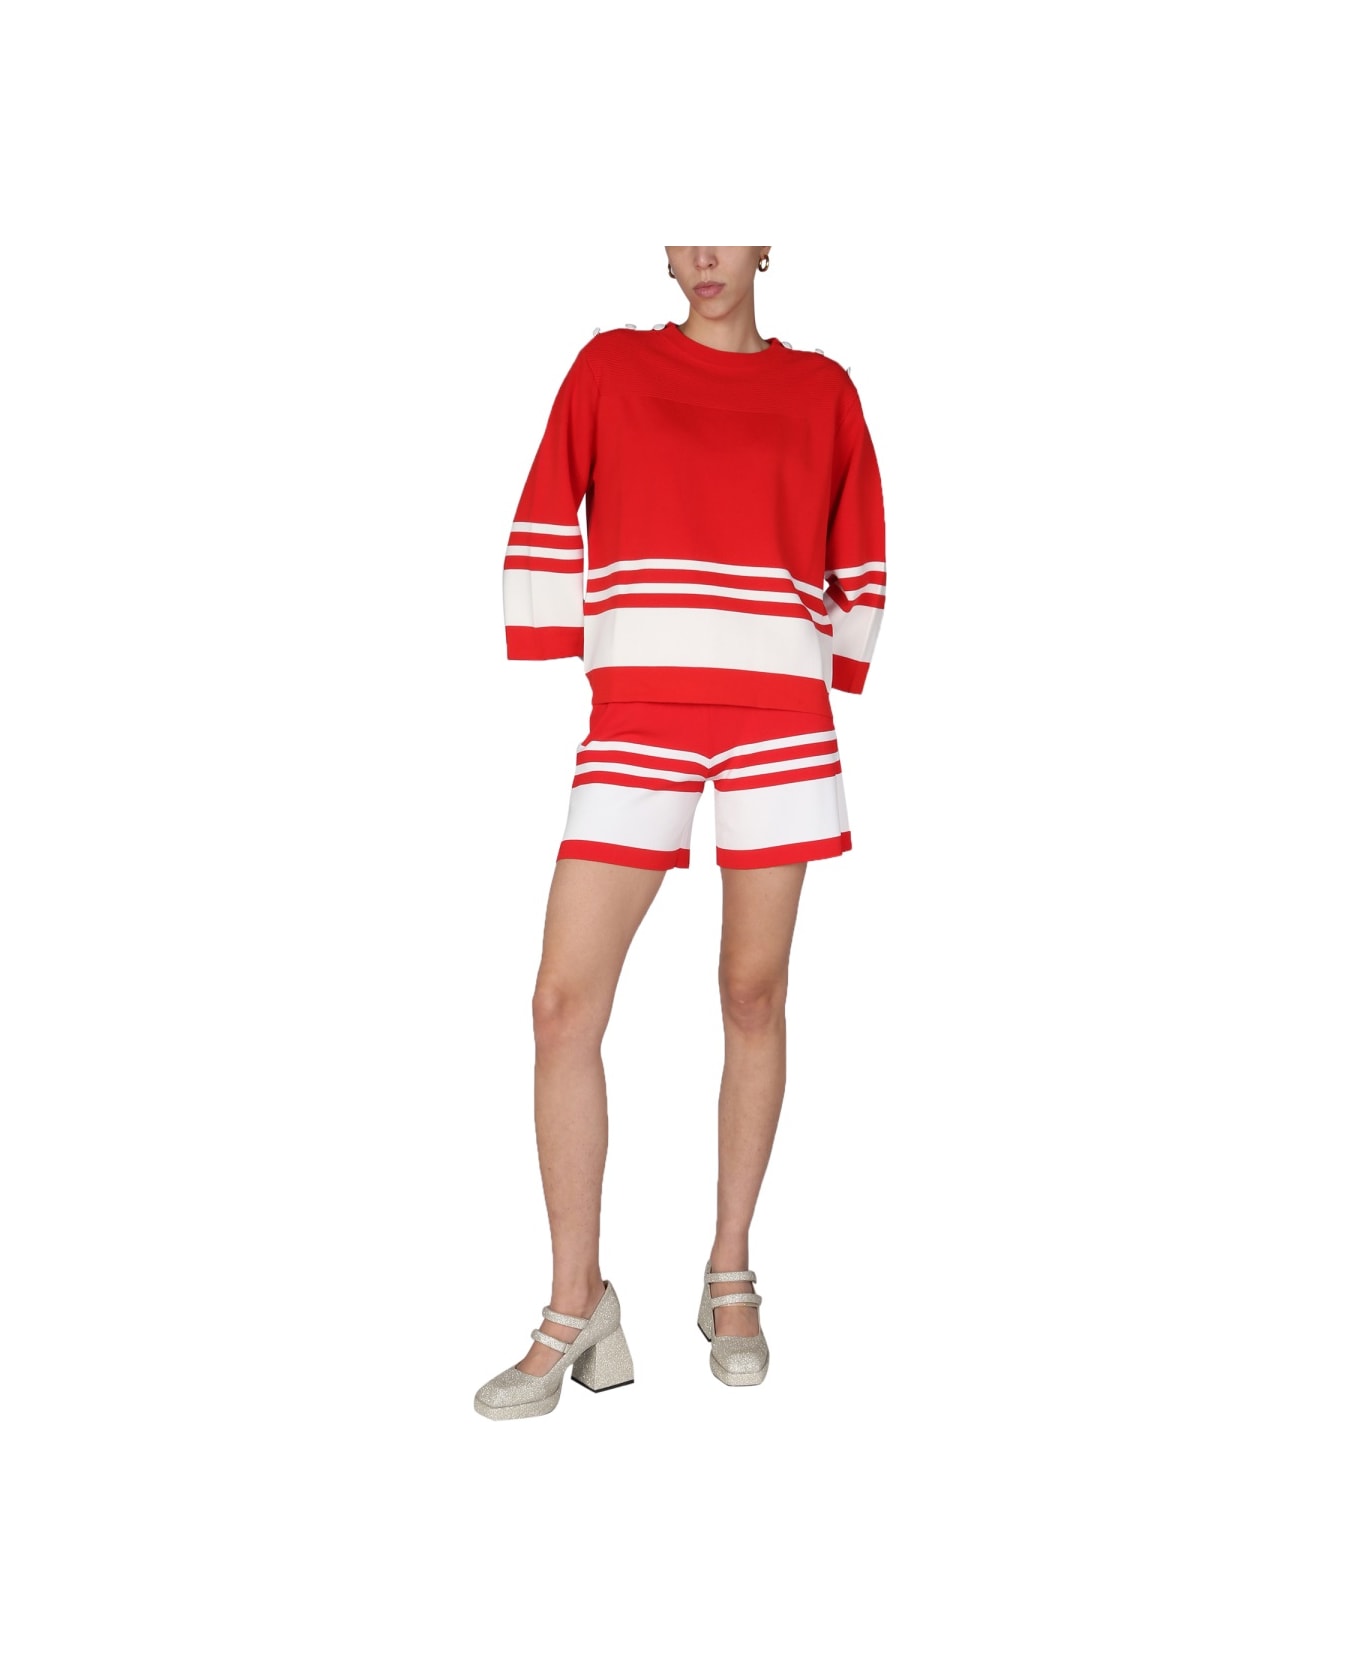 Boutique Moschino "sailor Mood" Shorts - RED